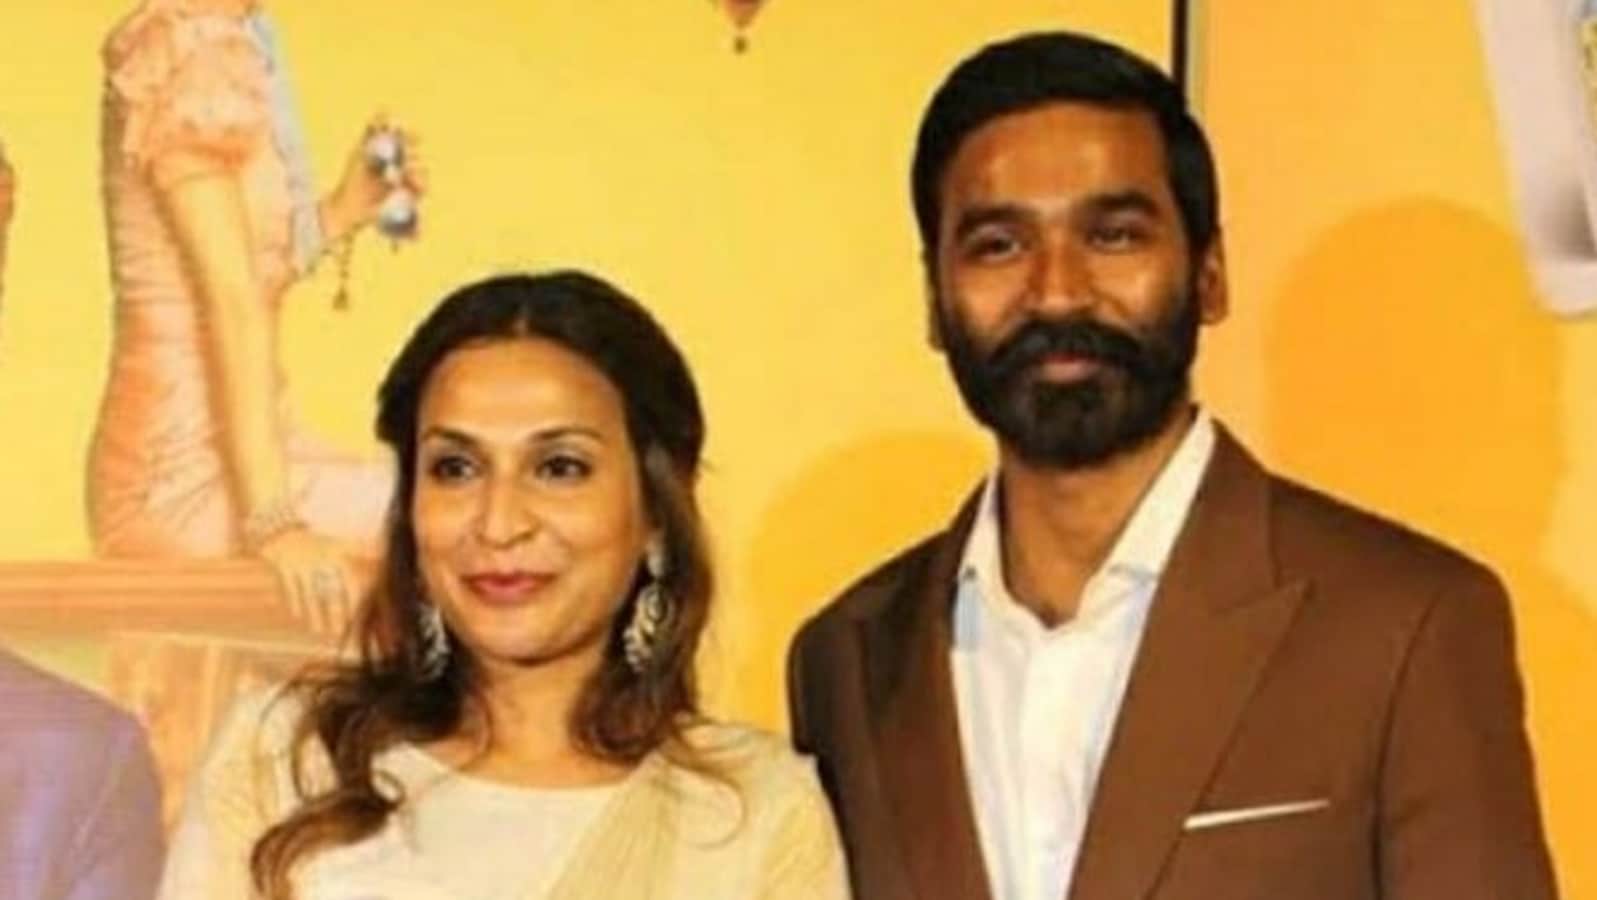 Dhanush announces separation from wife Aishwaryaa Rajinikanth after 18  years together: 'Please respect our decision' - Hindustan Times